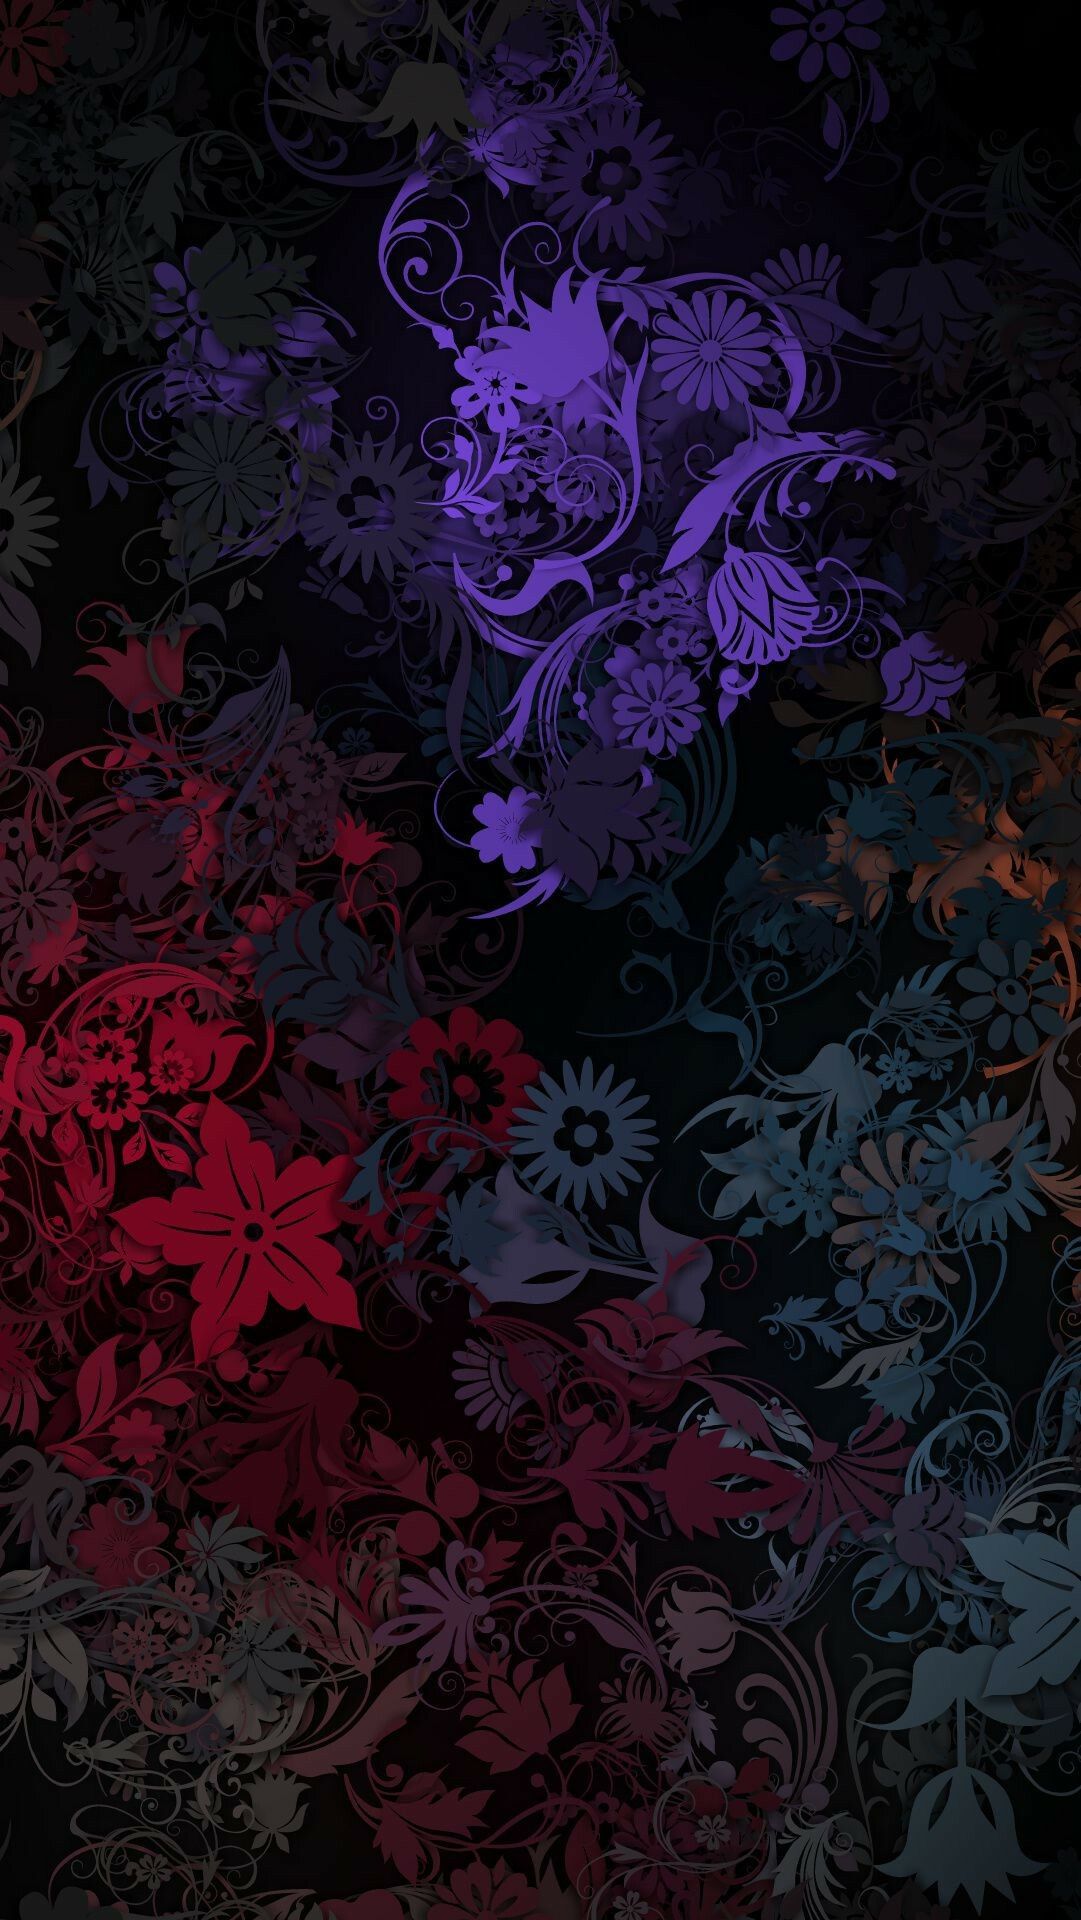 Phone Backgrounds, Iphone Wallpapers, Wallpaper Backgrounds, - Dark Flower Background Iphone , HD Wallpaper & Backgrounds